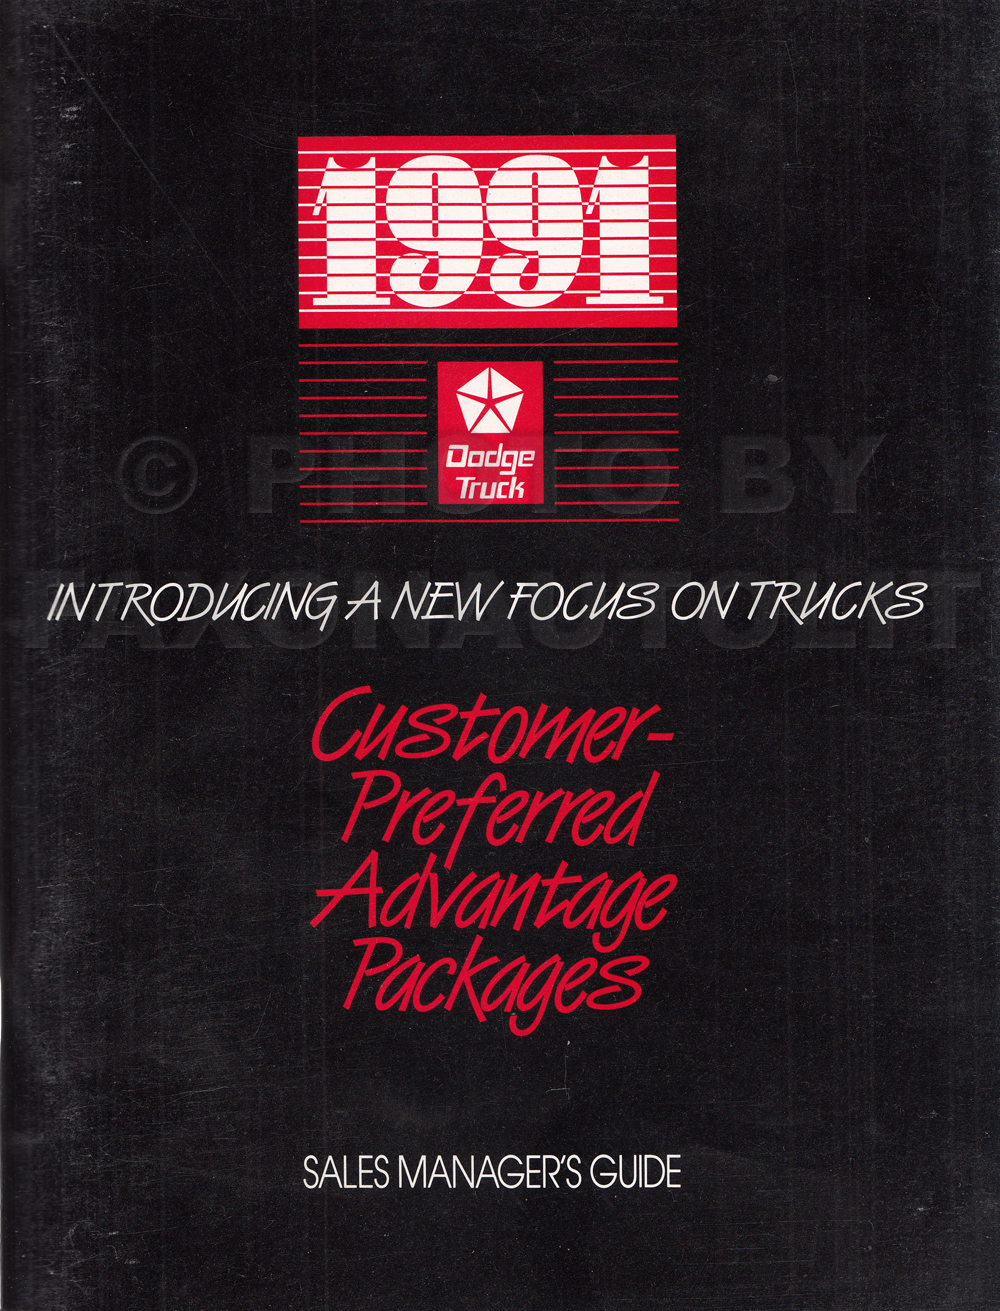 1991 Dodge Truck Customer-Preferred Advantage Packages Sales Manager's Guide